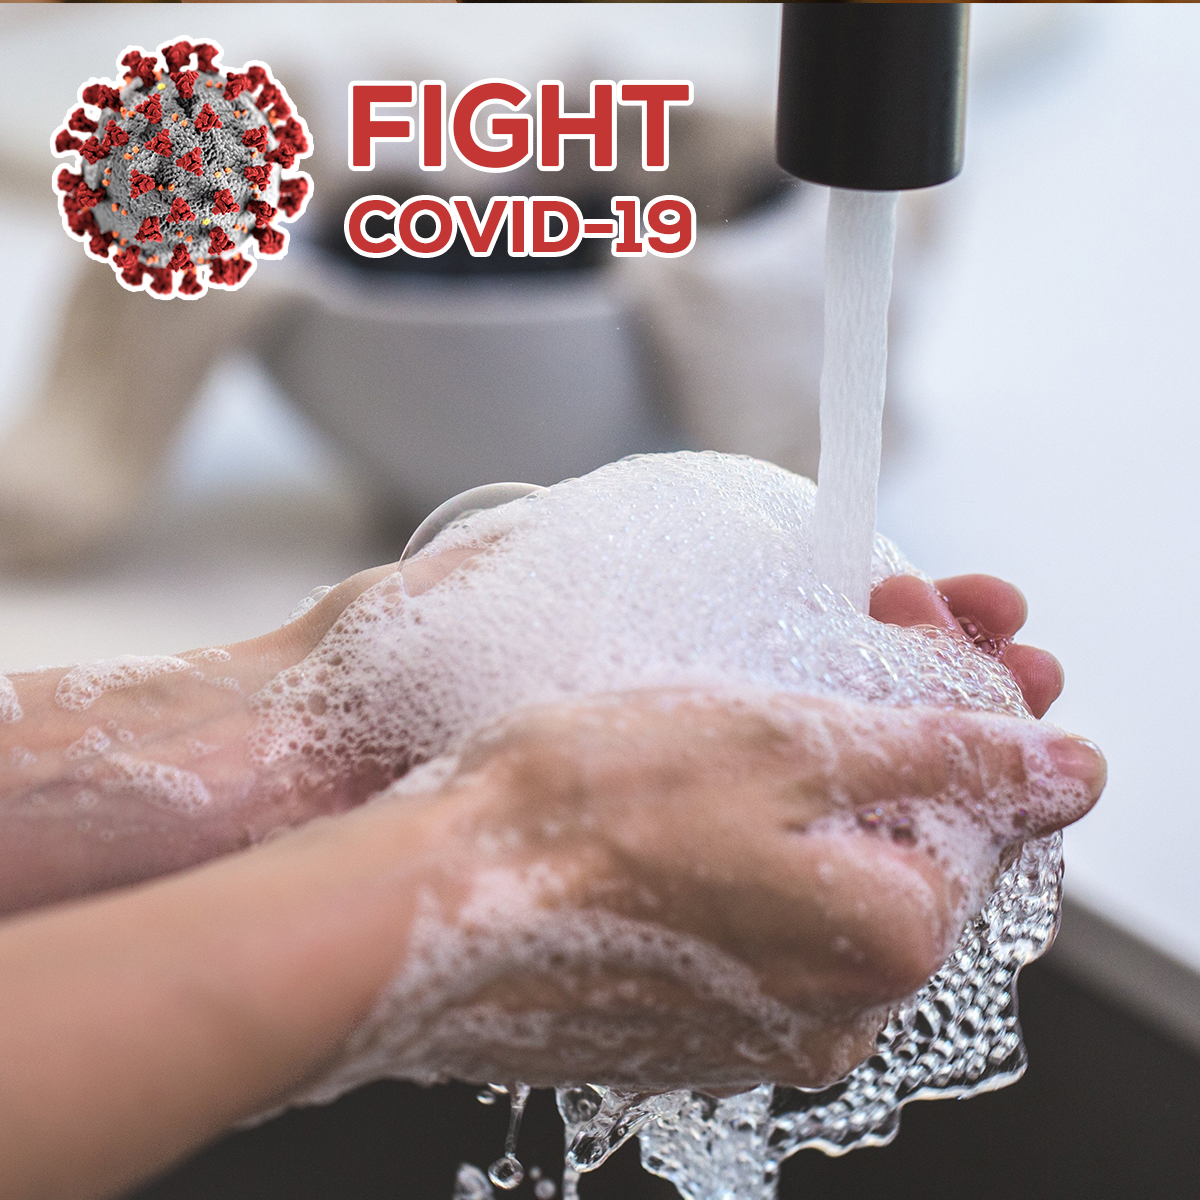 Fighting COVID-19 With Hand Hygiene Is the Safest Choice